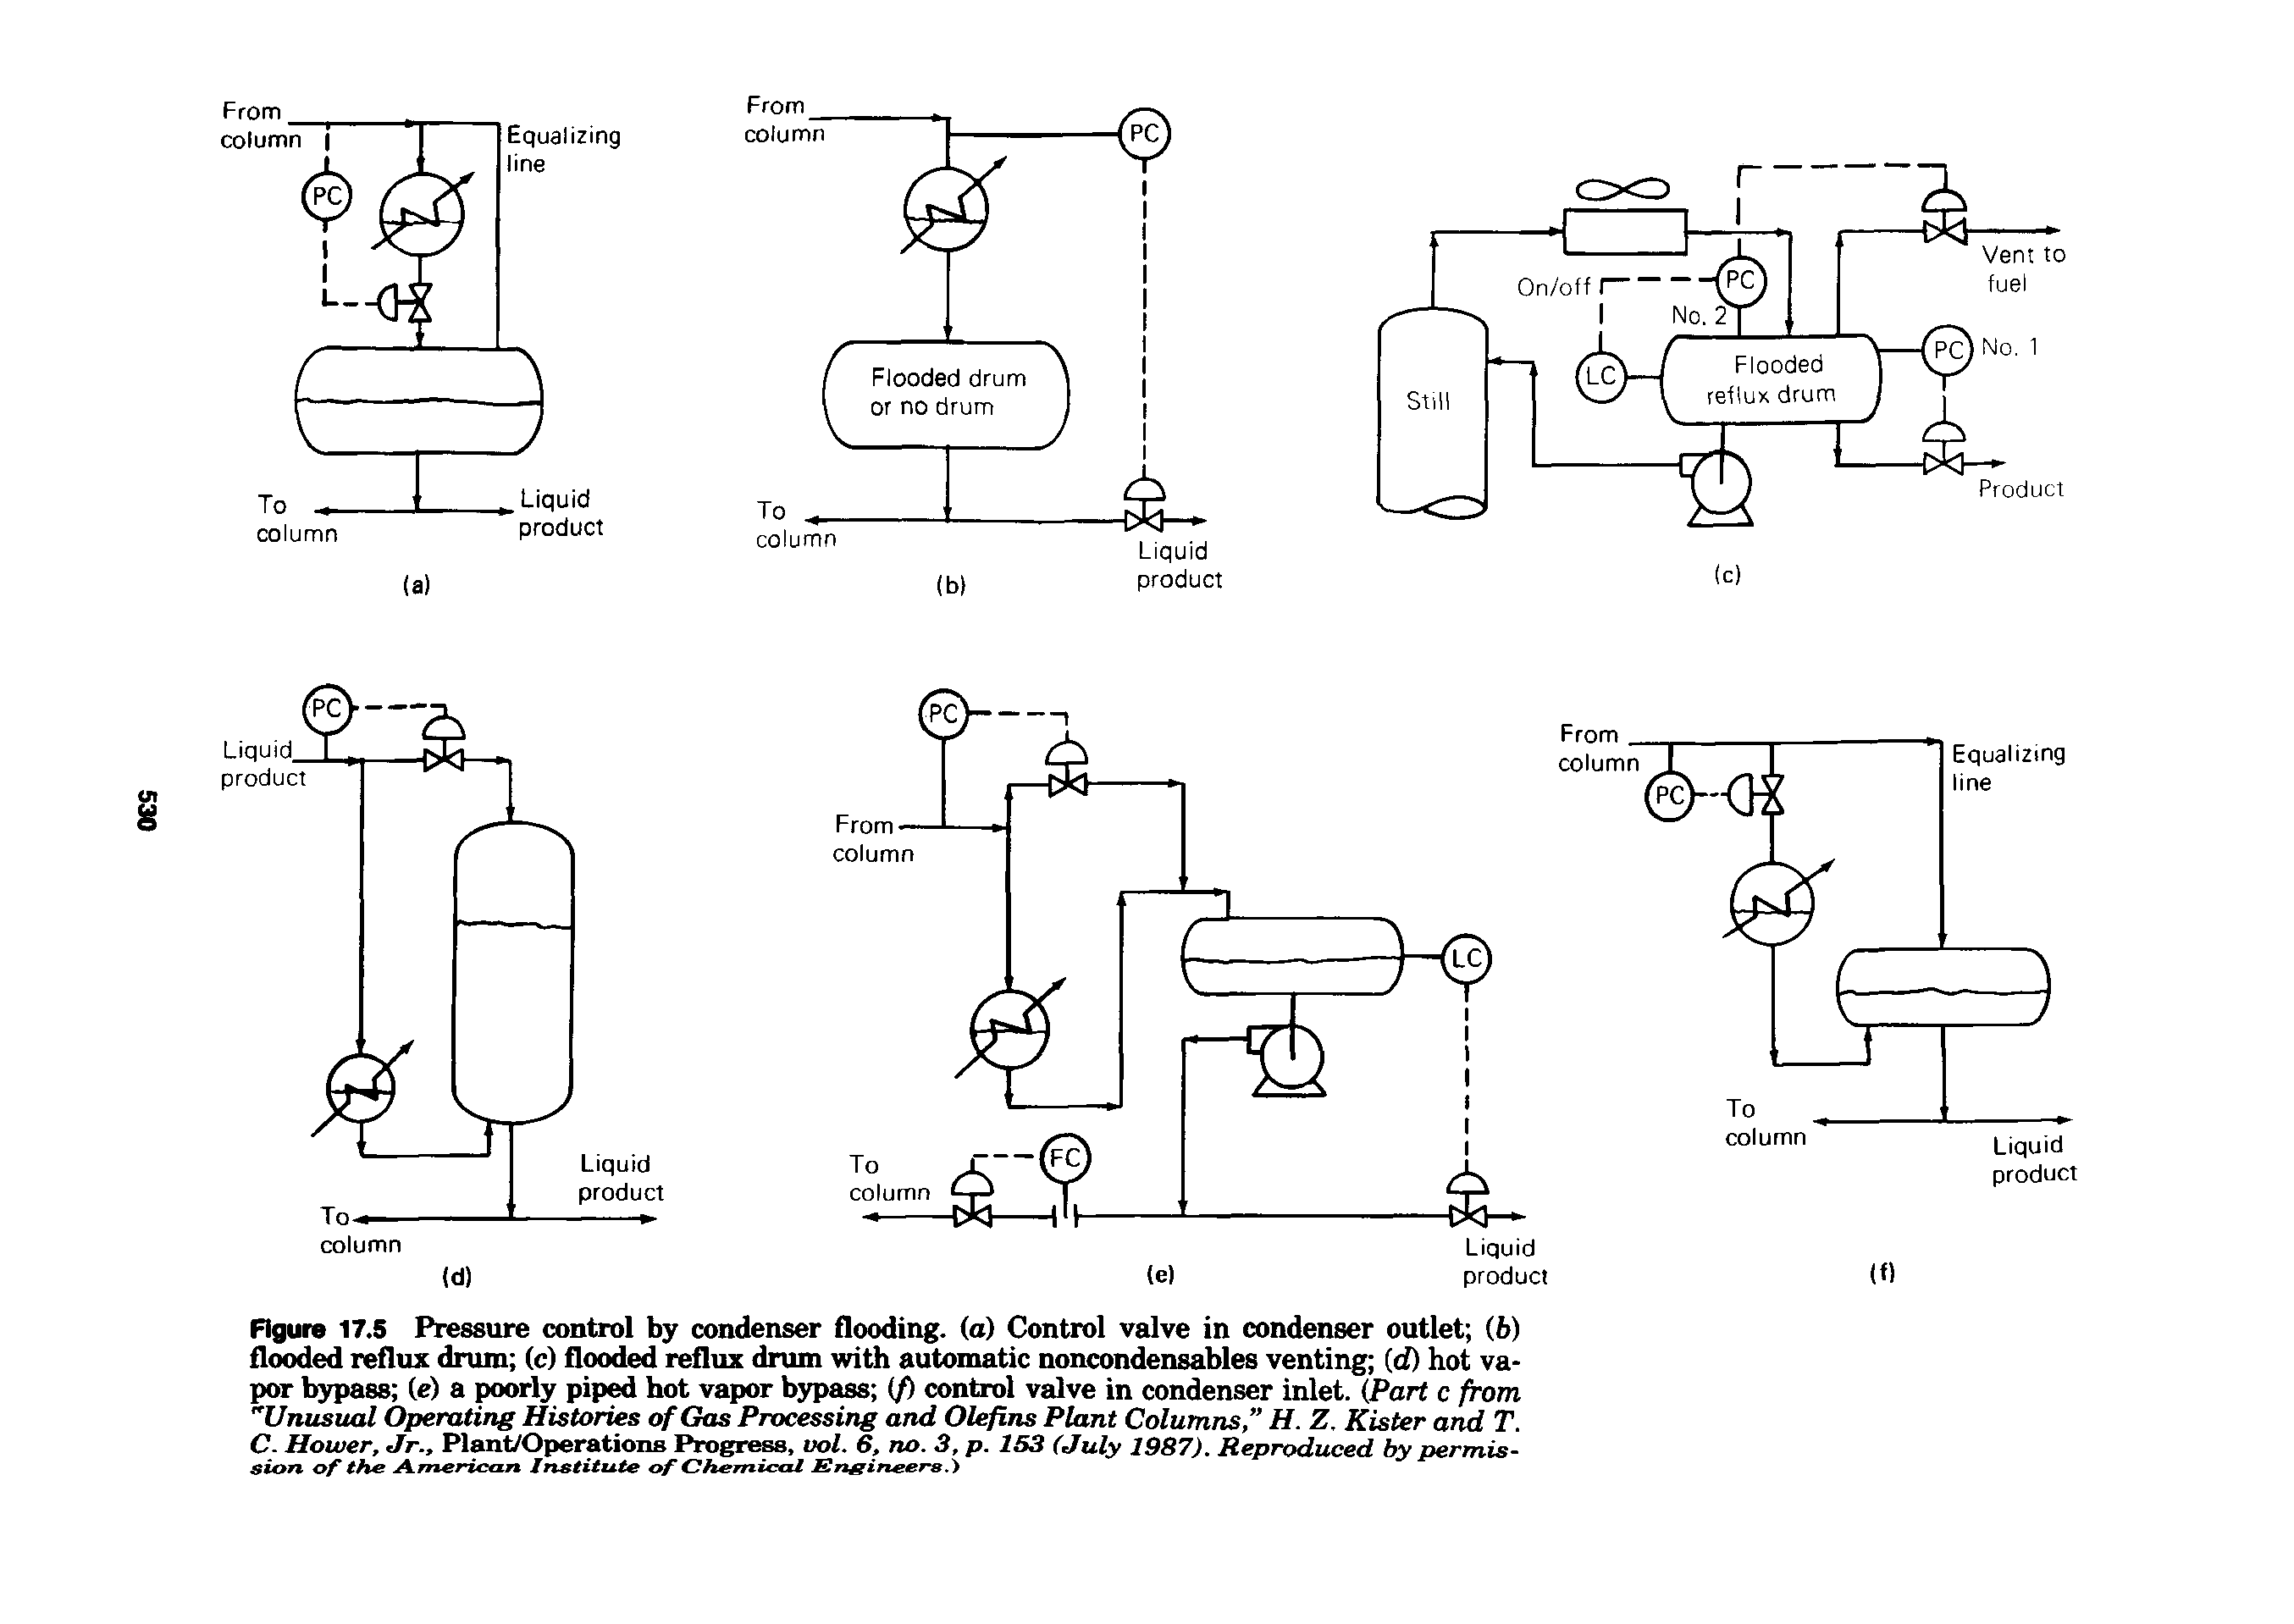 Figure 17.5 Pressure control by condenser flooding, (a) Control valve in condenser outlet ib) flooded reflux drum (c) flooded reflux drum with automatic noncondensables venting [d) hot vapor bypass (c) a poorly pip hot vapor bypass if) control valve in condenser inlet. (Part c from "Unusual Operating Histories of Gas Processing and Olefins Plant Columns, H. Z. Kister and T. C. Hower, Jr., Plant/Operations Progi a, vol. 6. no. 3, p. 153 (July 1987). Reproduced by permis-...